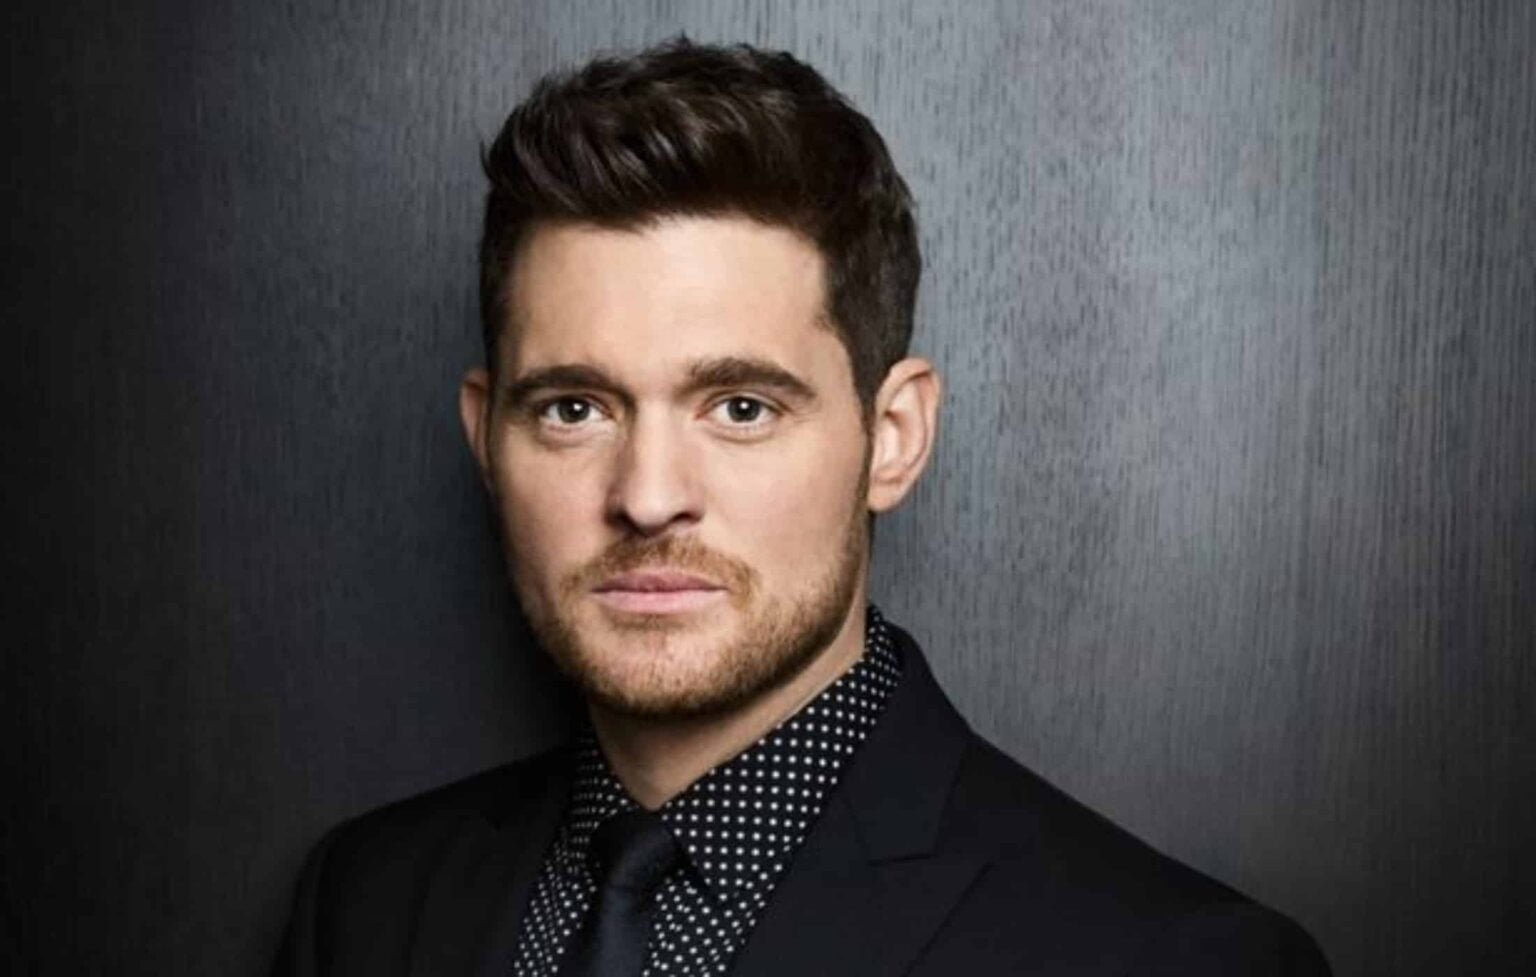 Michael Buble net worth, age, height, wiki, family, biography, wife